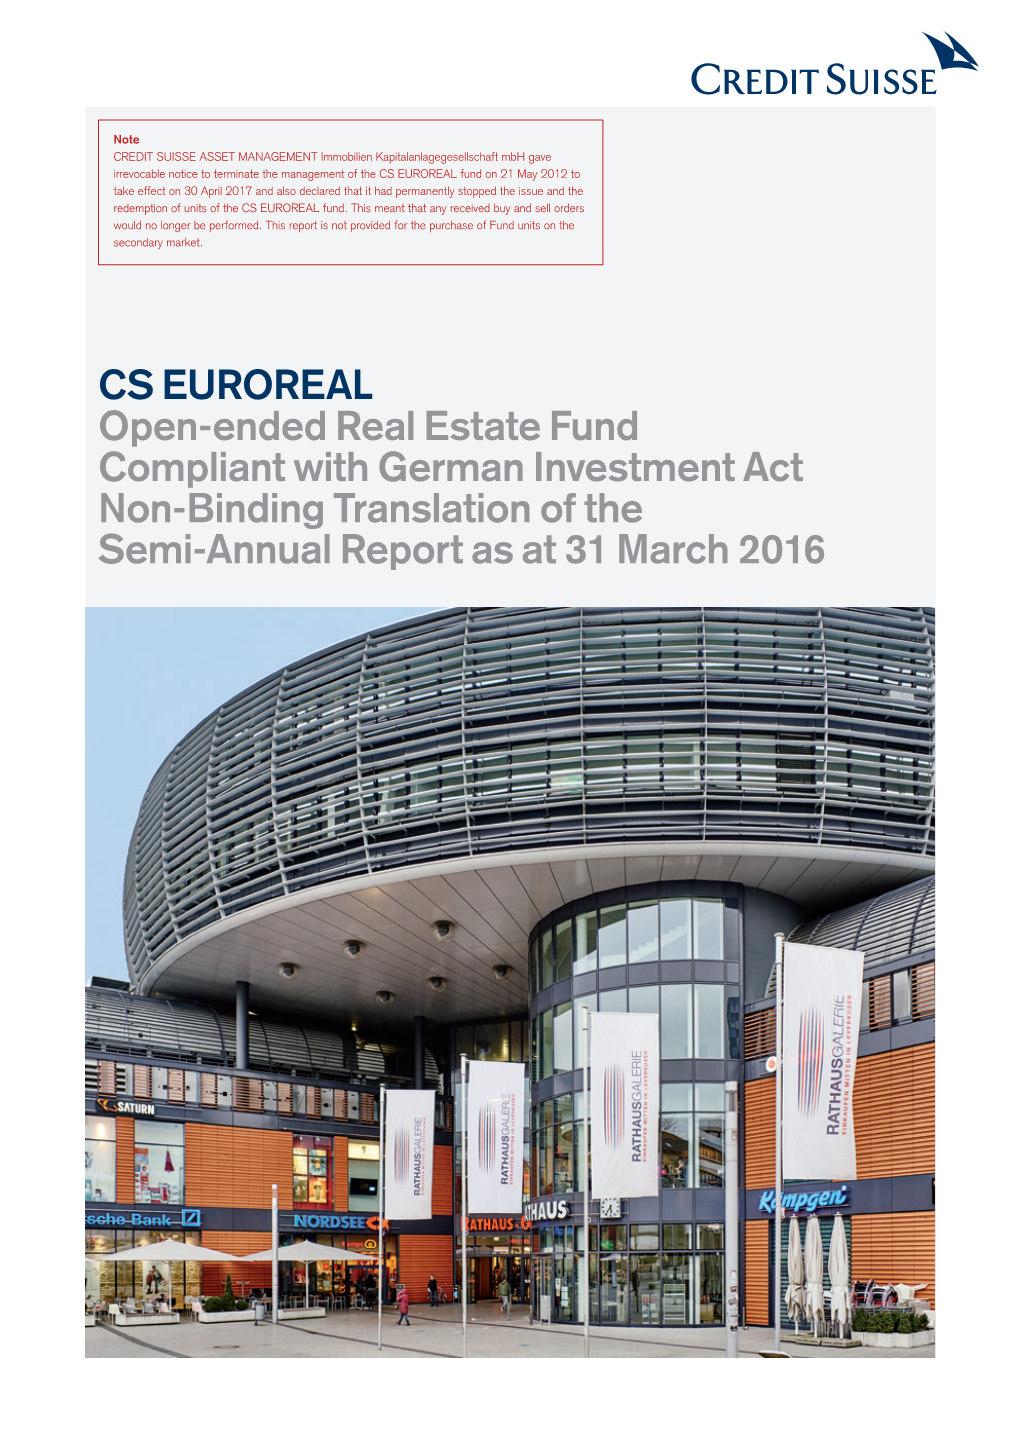 CS EUROREAL Open-Ended Real Estate Fund Compliant